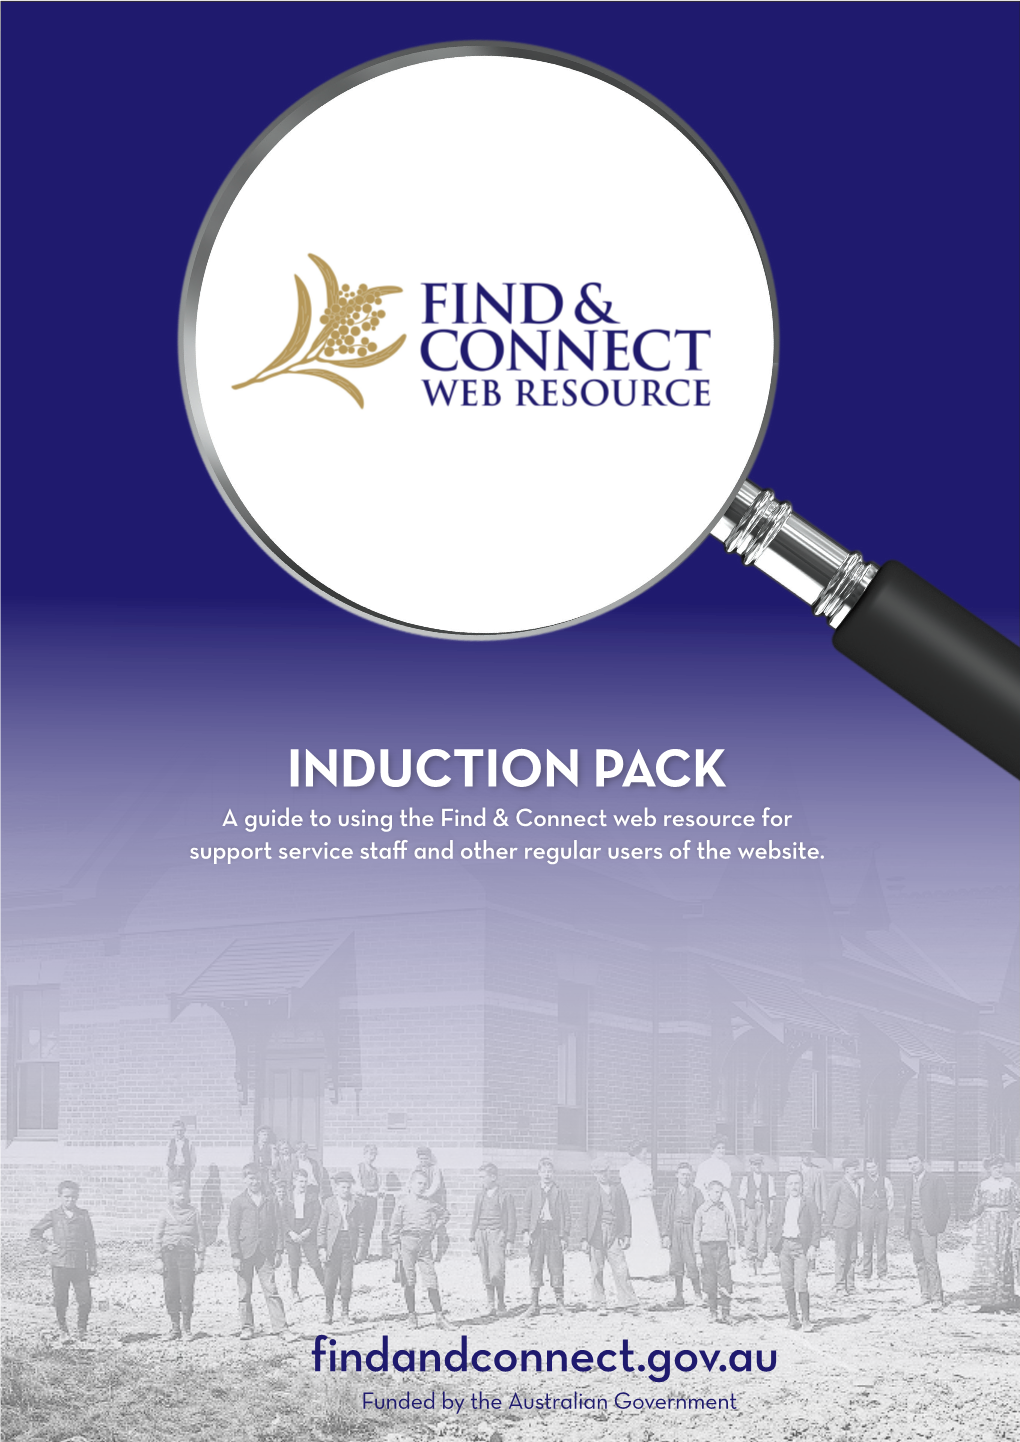 INDUCTION PACK a Guide to Using the Find & Connect Web Resource for Support Service Staff and Other Regular Users of the Website